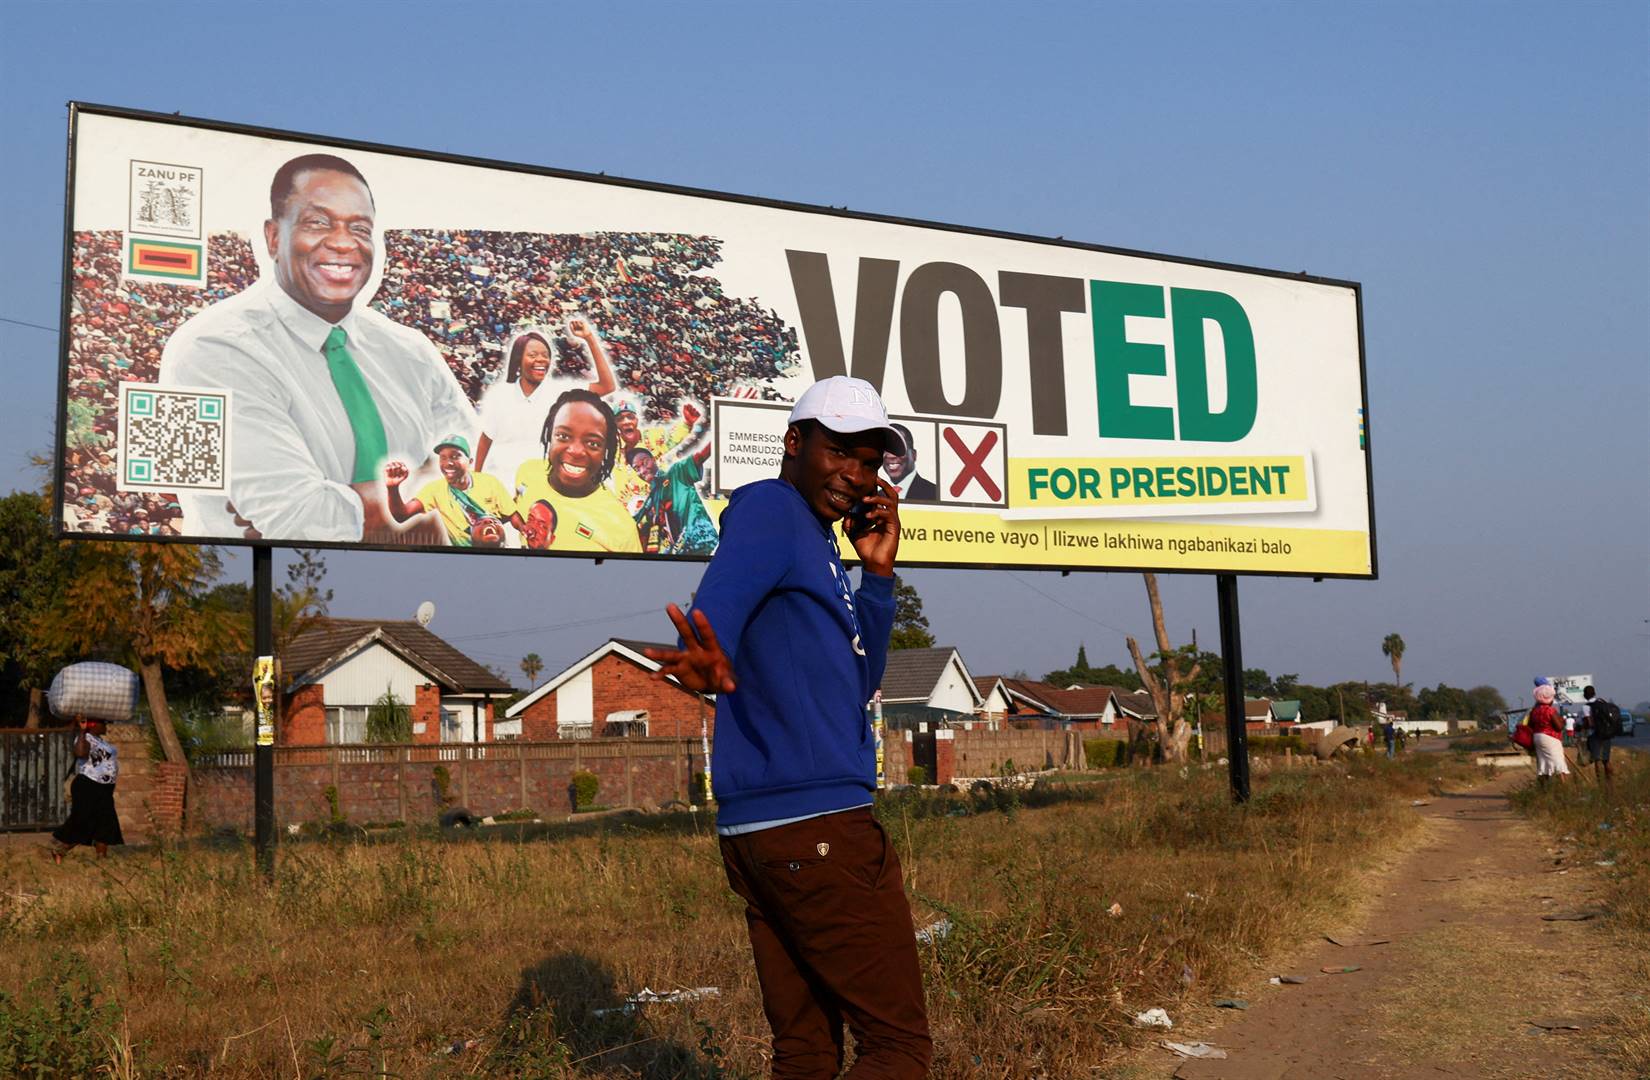 A man gestures while speaking on a cellphone as he walks past a banner of the ruling Zanu-PF party’s President Emmerson Mnangagwa, who was re-elected in the recent presidential elections in Harare, Zimbabwe. 